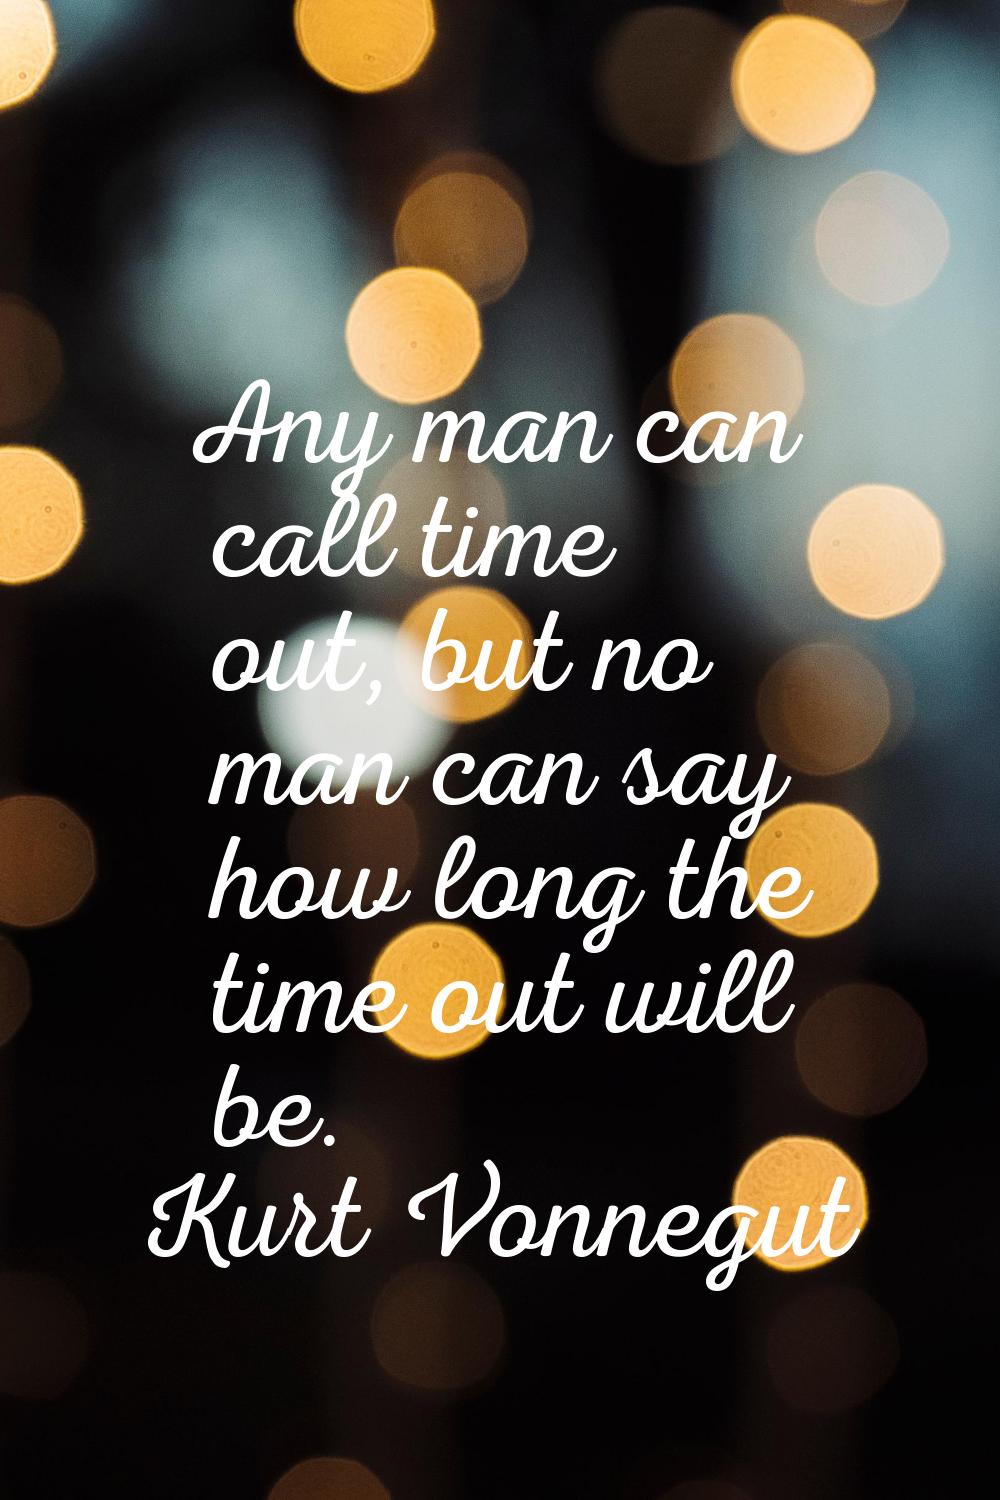 Any man can call time out, but no man can say how long the time out will be.